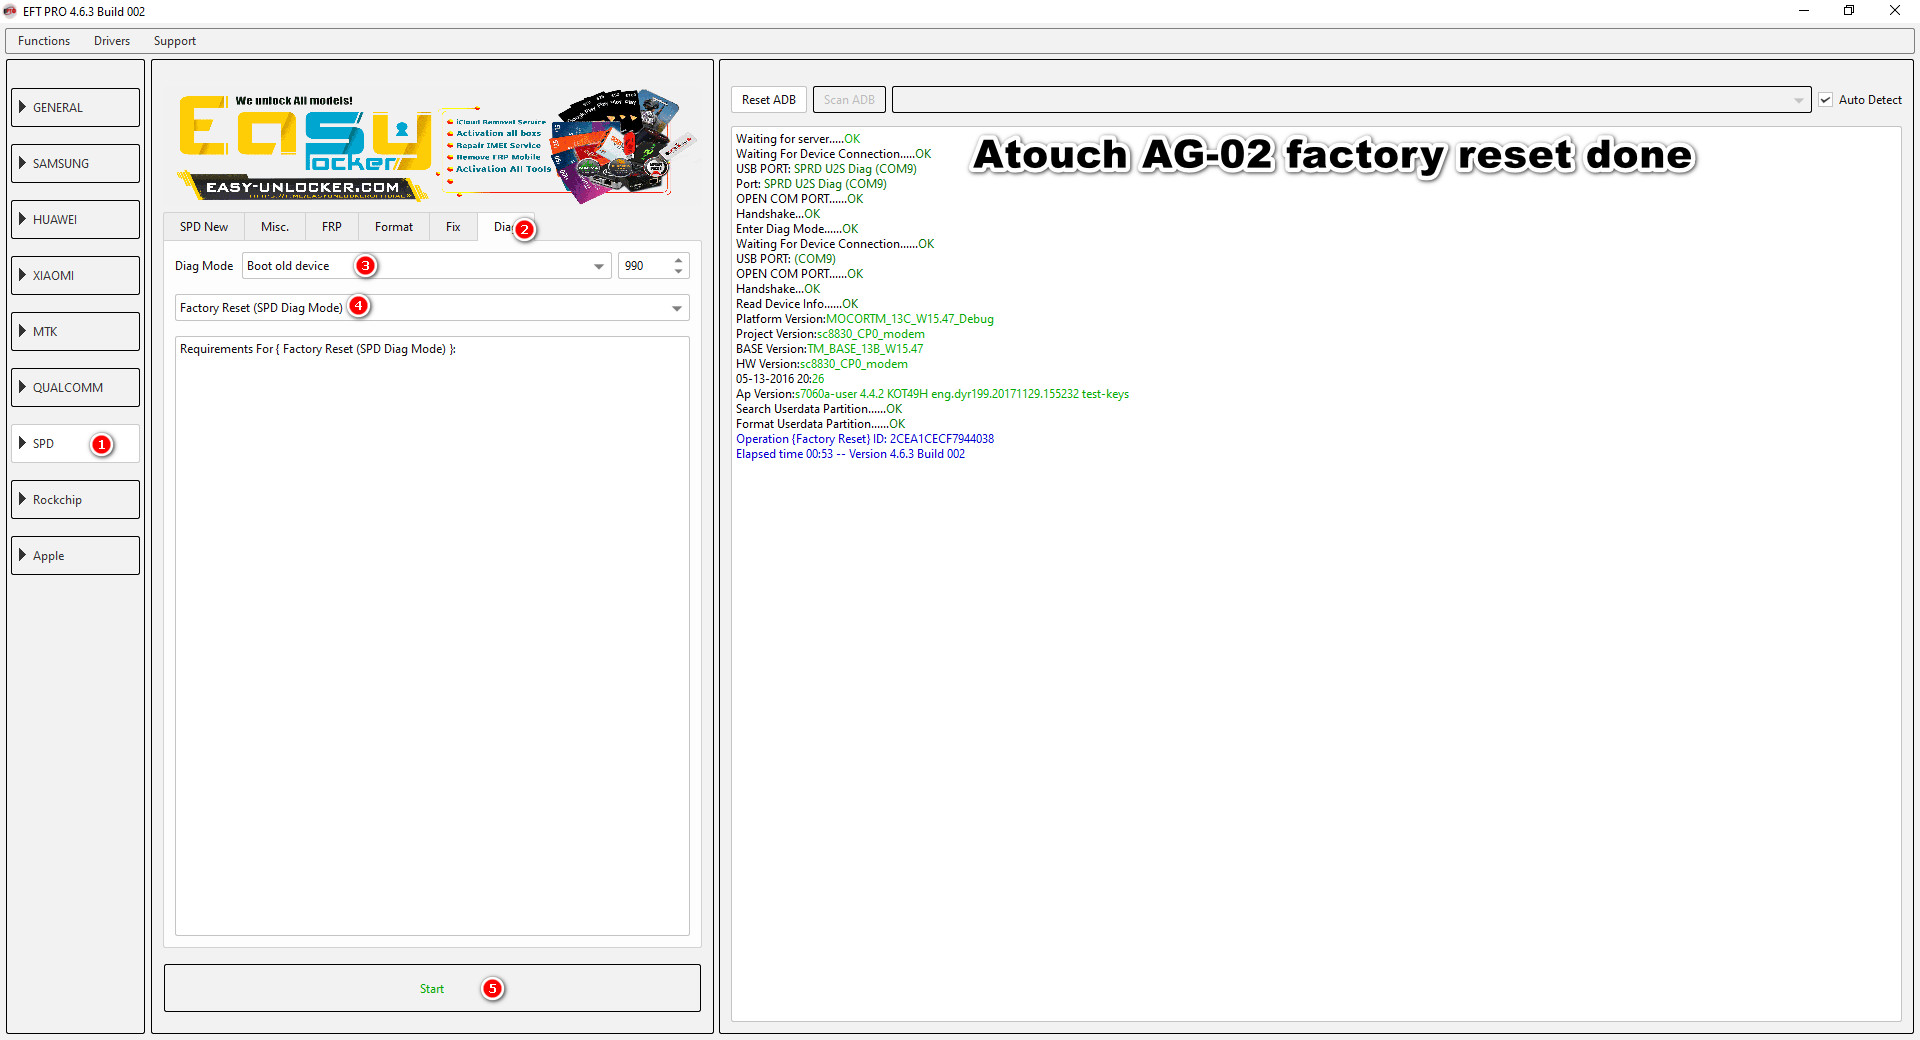 Atouch AG-02 factory reset done